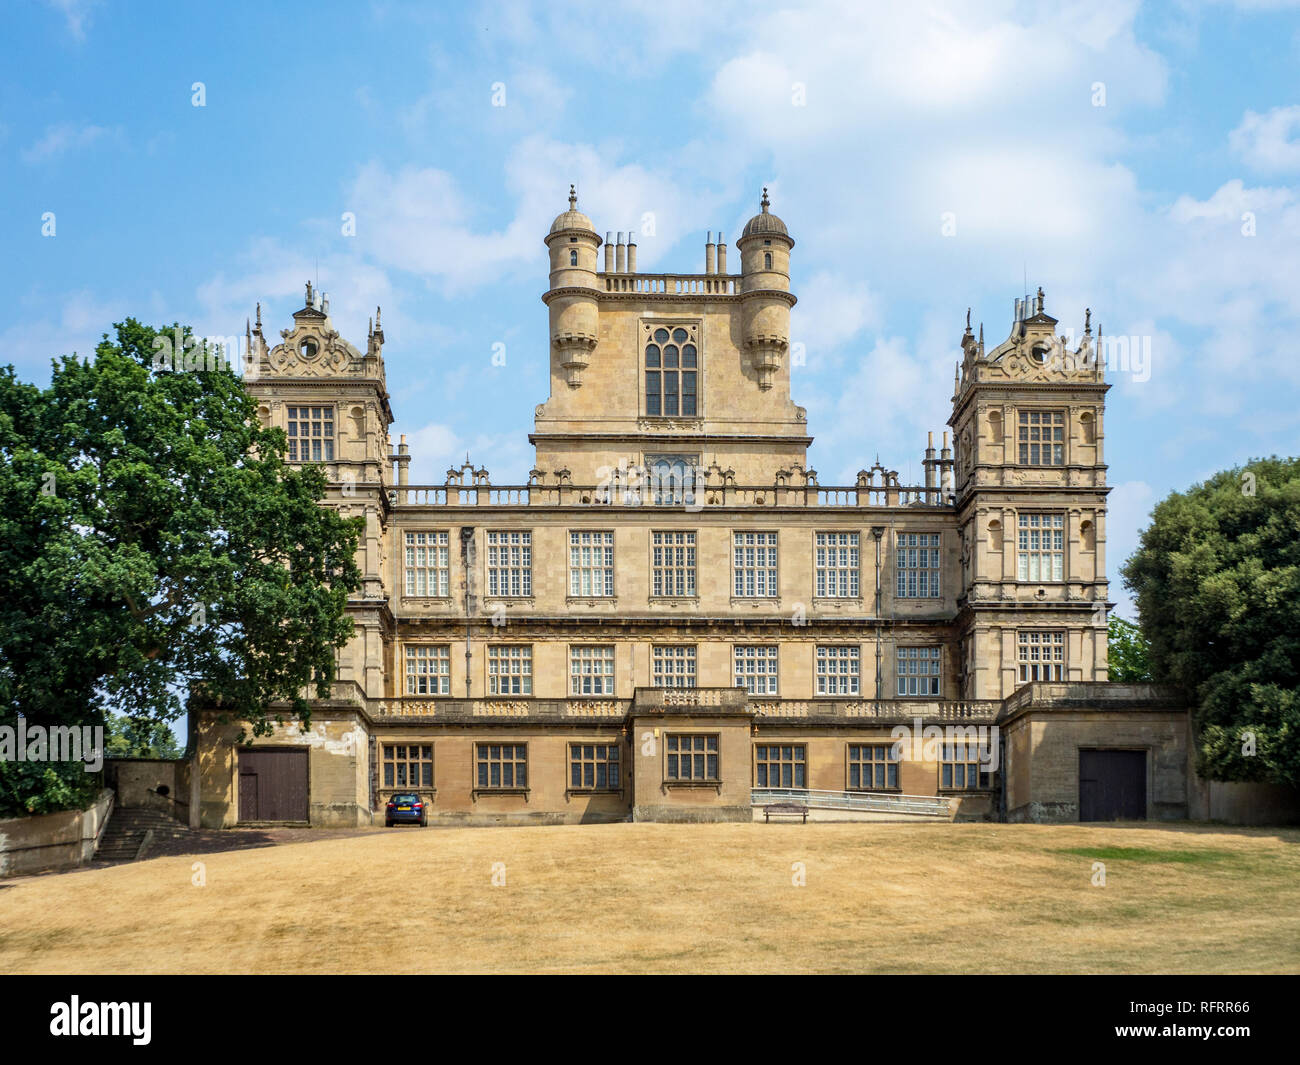 Renaissance Wallaton Hall in Nottingham, England, UK. Built in 16th  as a country house of Elizabeth I, surrounded by a big park. Stock Photo